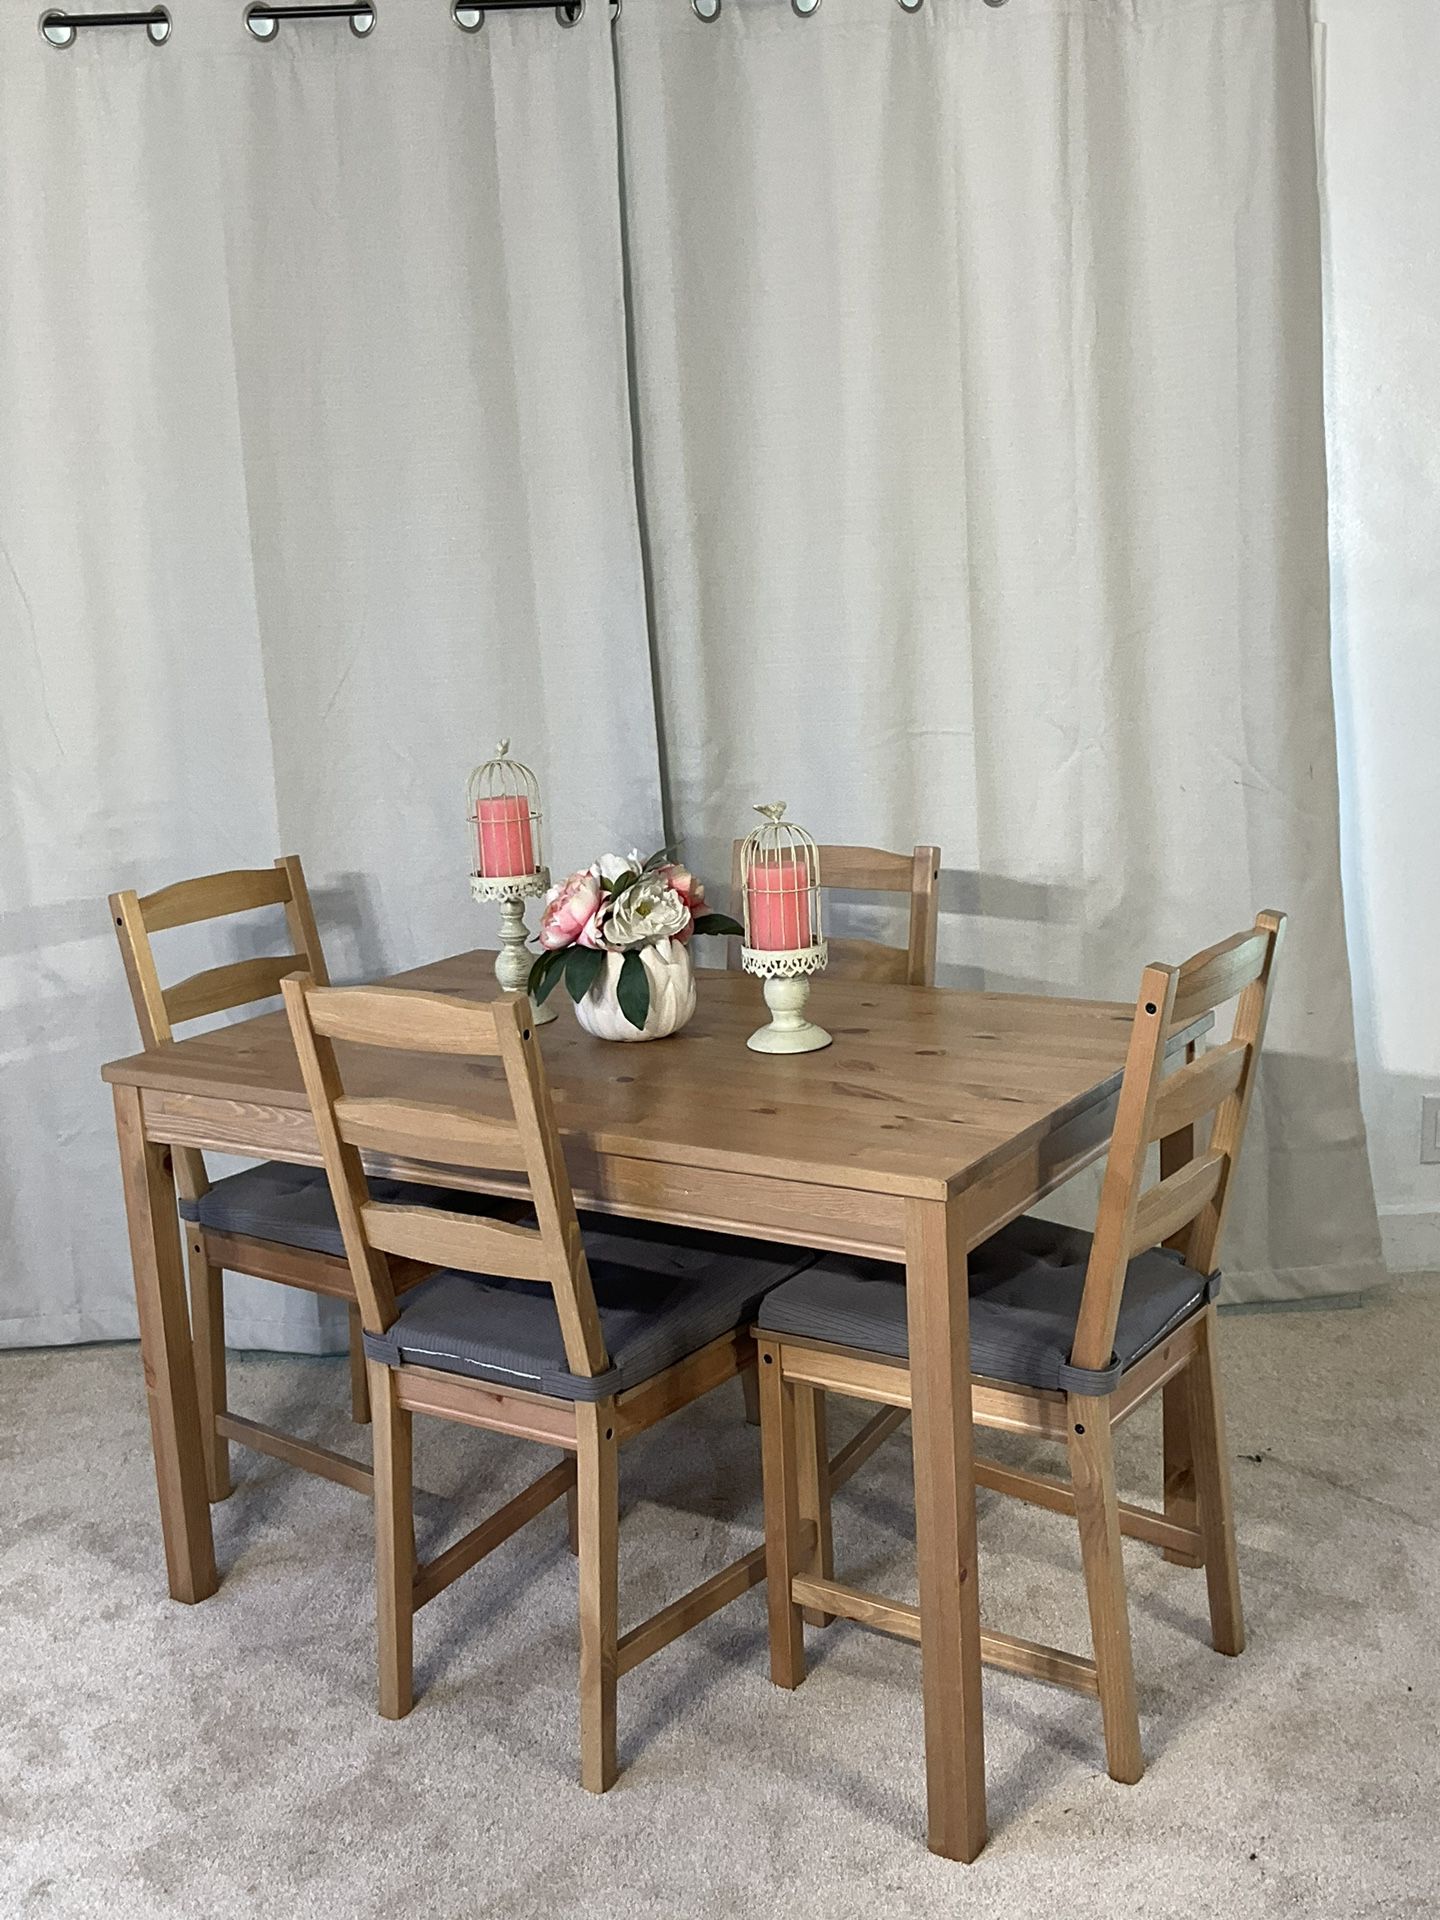 Kitchen Dining Table & 4 Chairs  LIKE NEW CONDITION; GREAT DEAL!